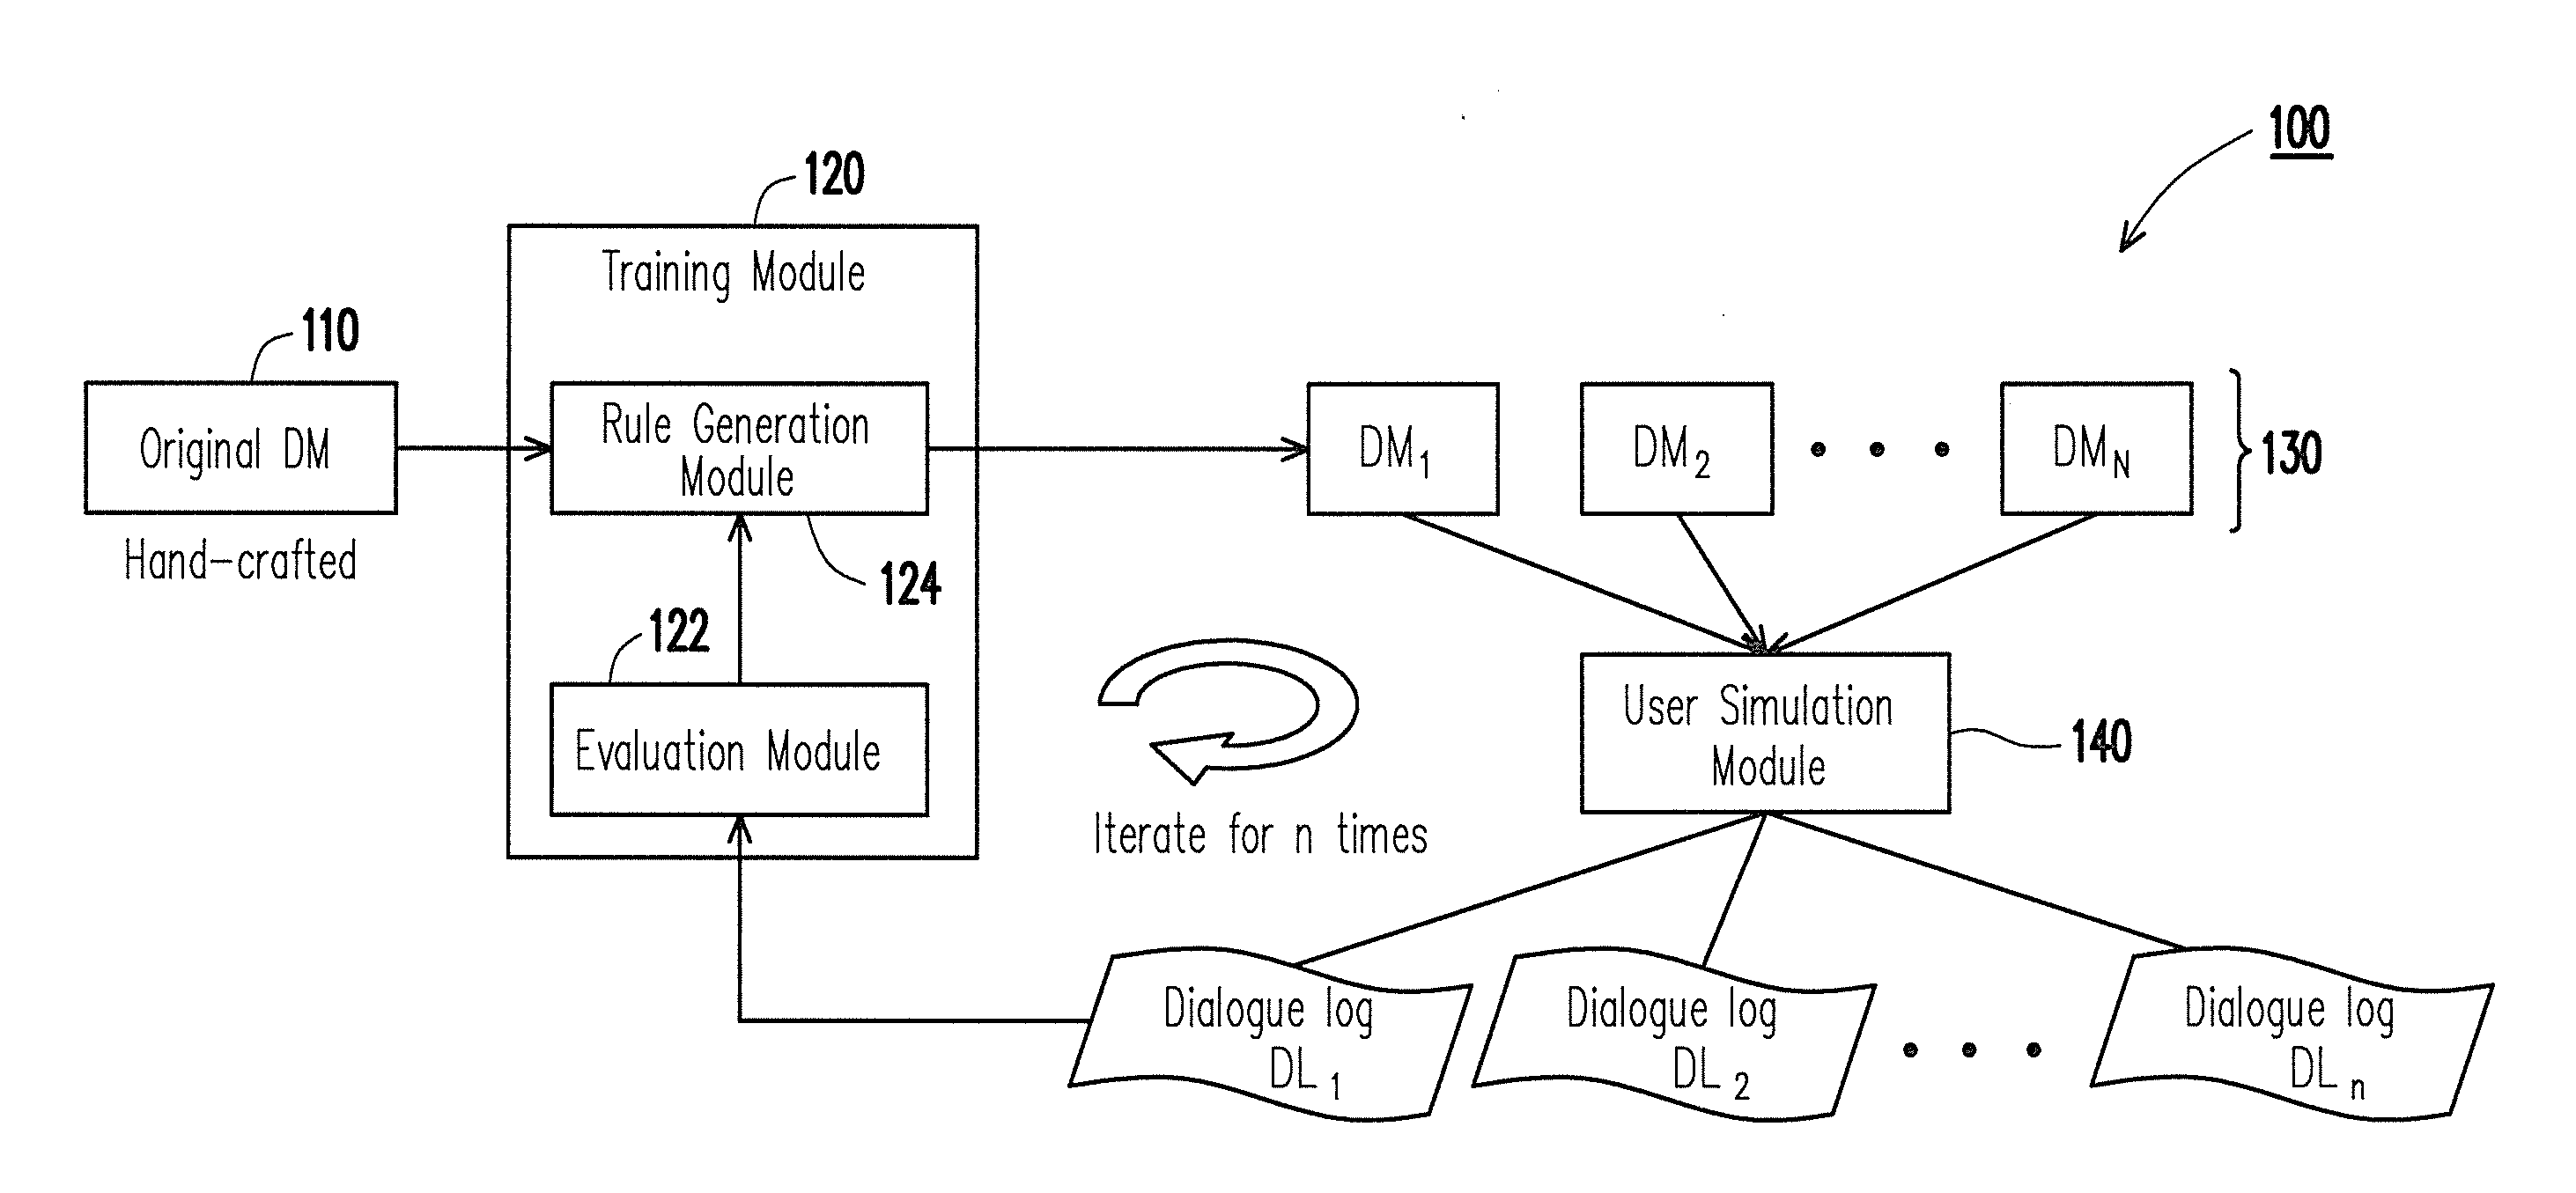 Method and system for generating dialogue managers with diversified dialogue acts